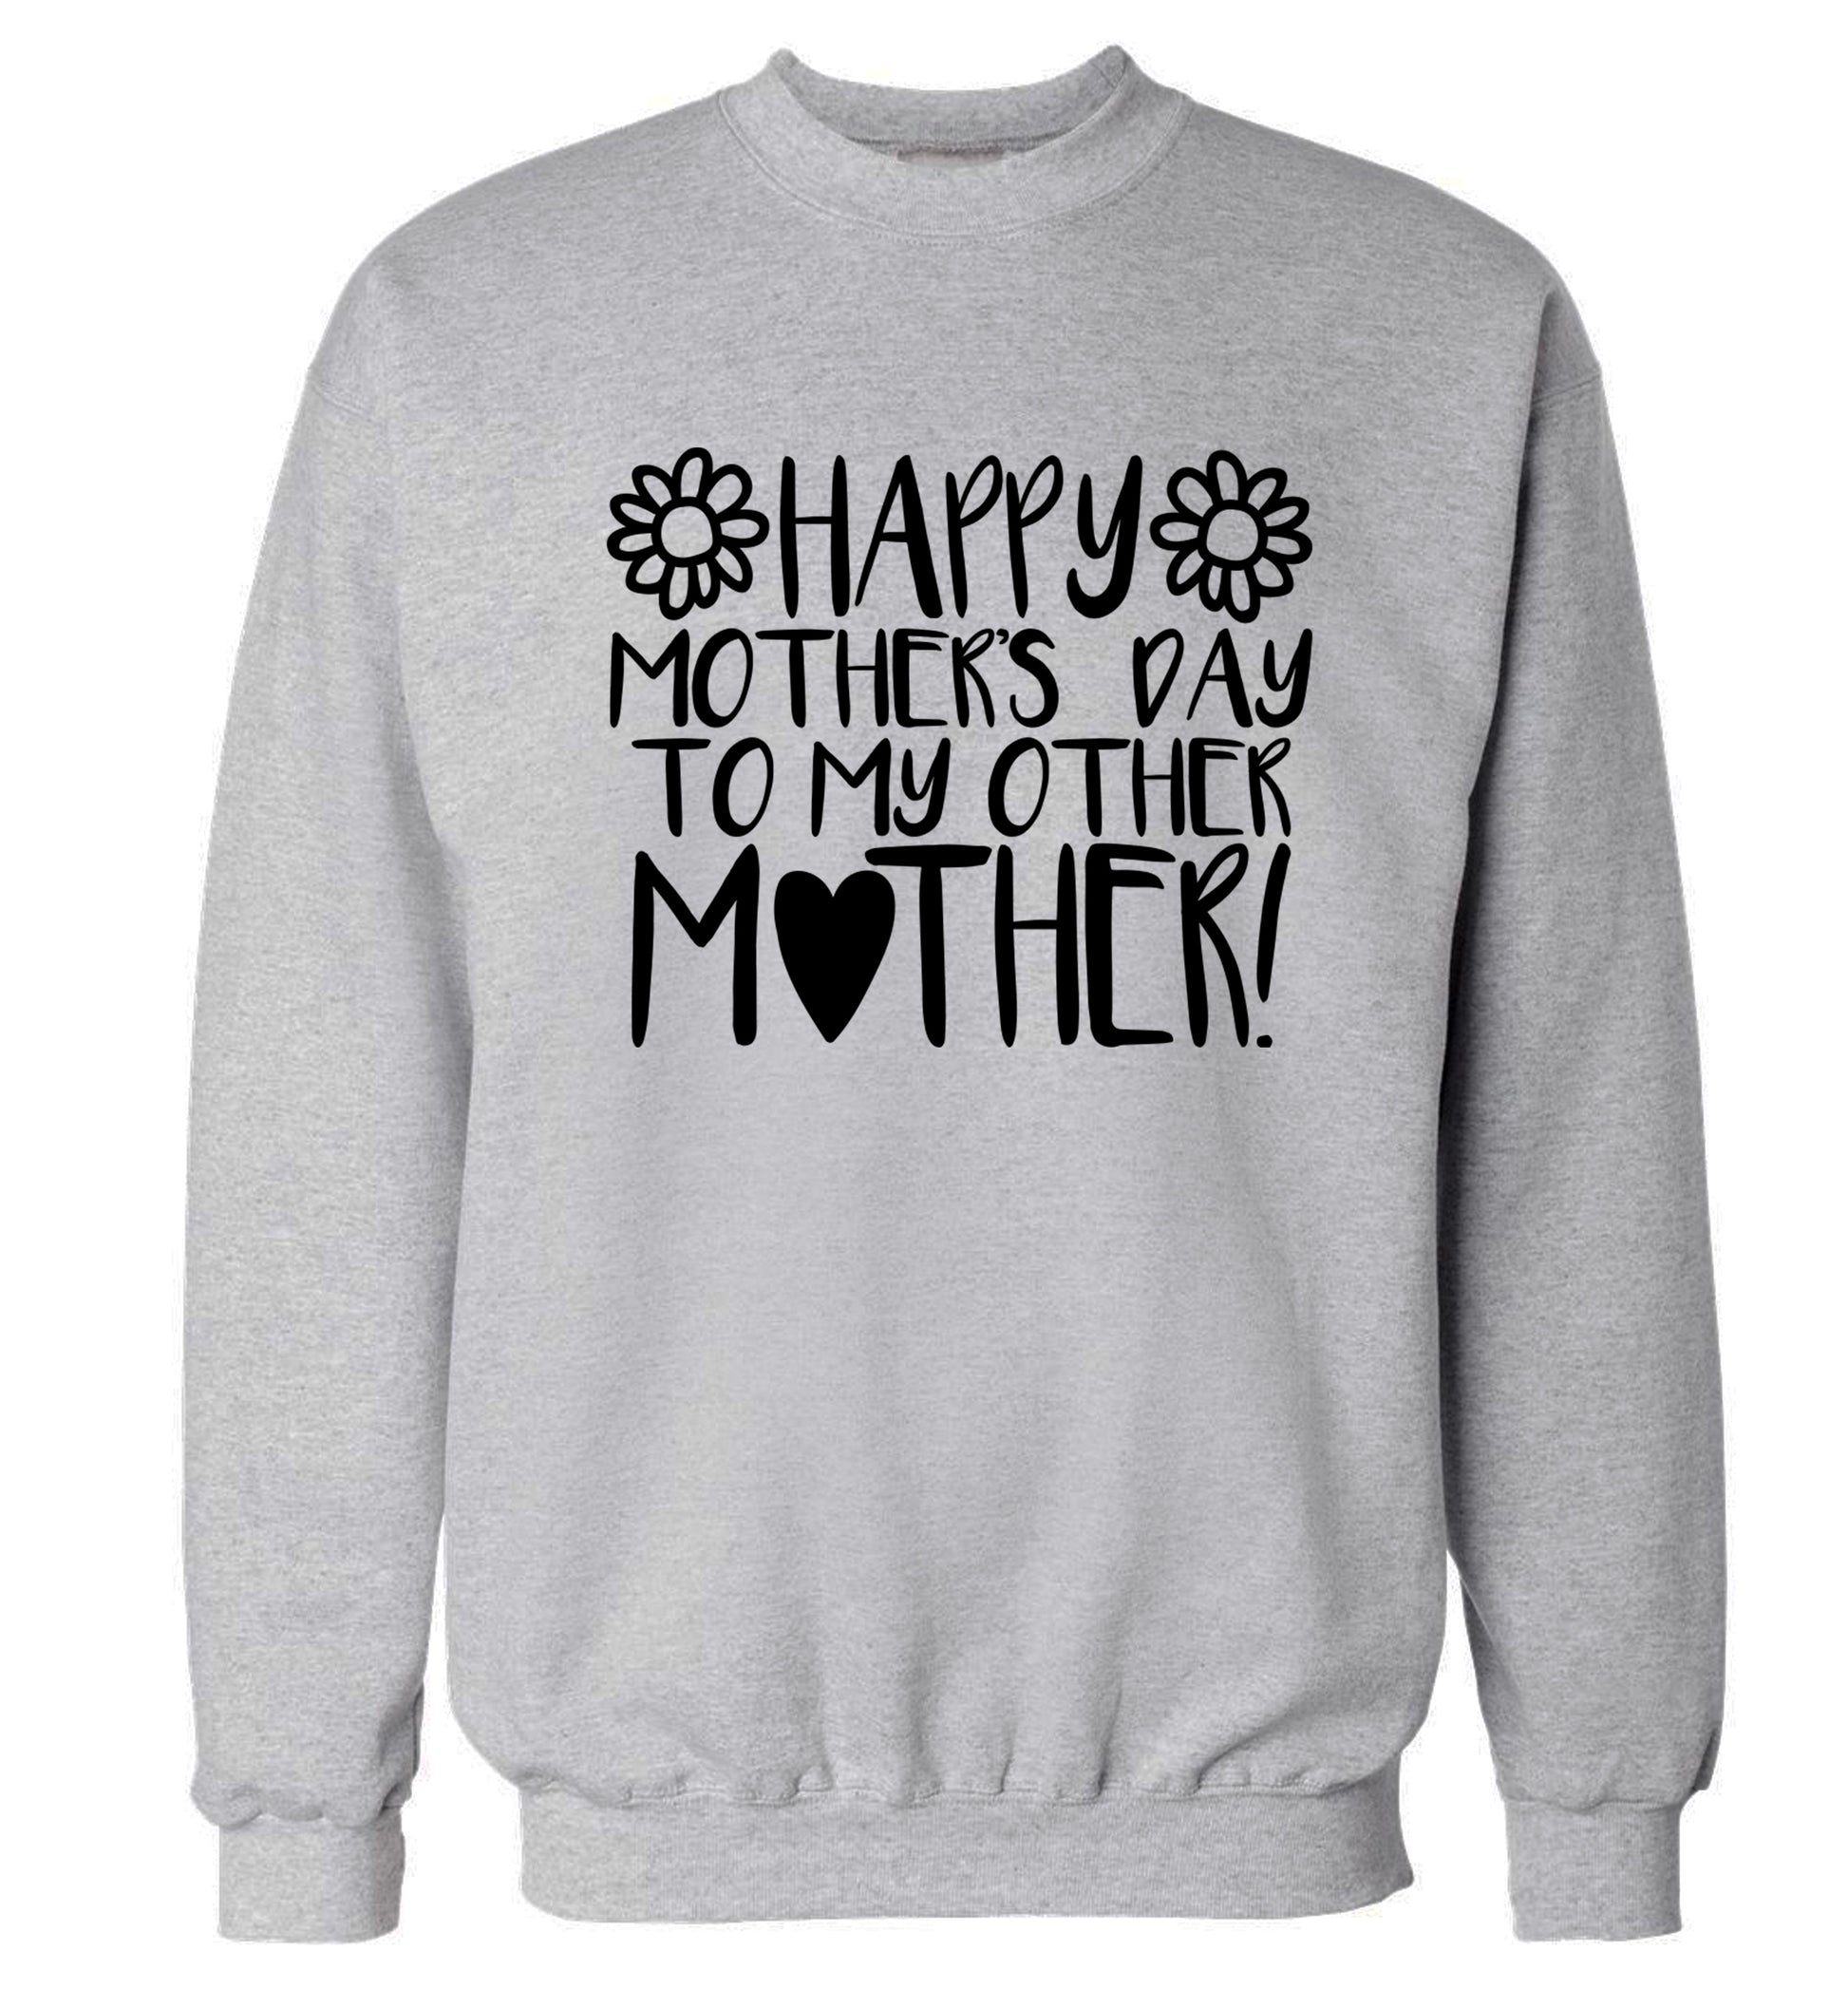 Happy mother's day to my other mother Adult's unisex grey Sweater 2XL